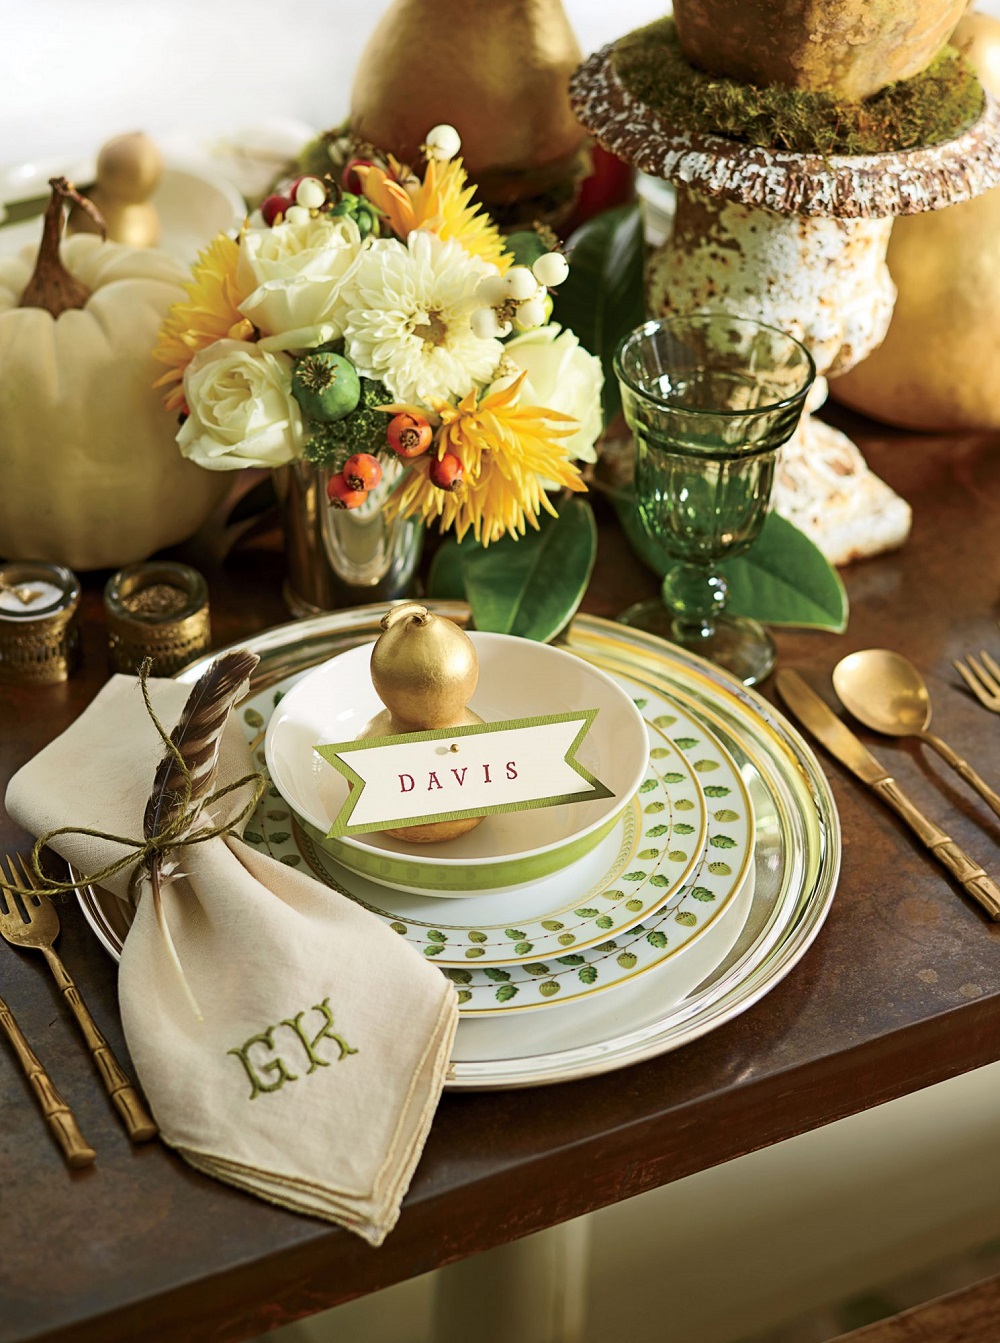 t3-66 Thanksgiving decorating ideas that will make your home look great